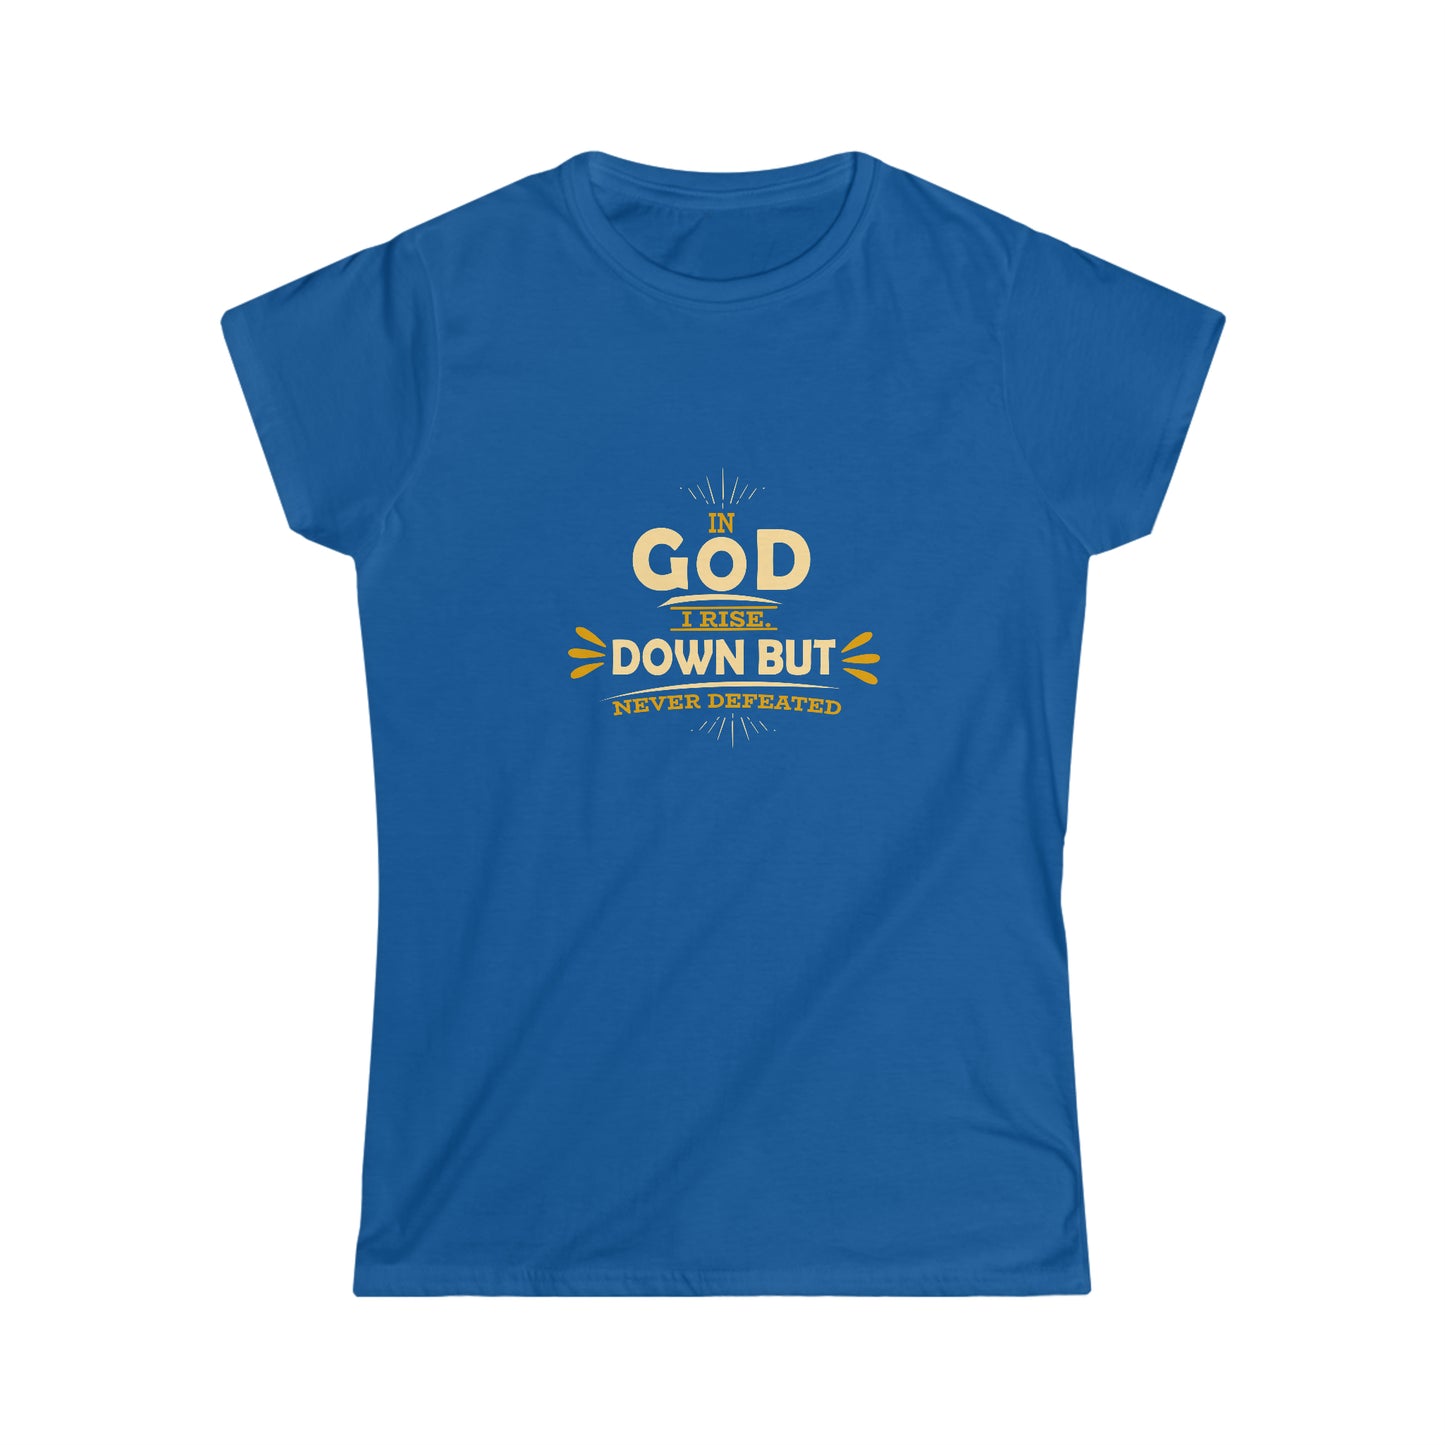 In God I Rise Down But Never Defeated Women's T-shirt